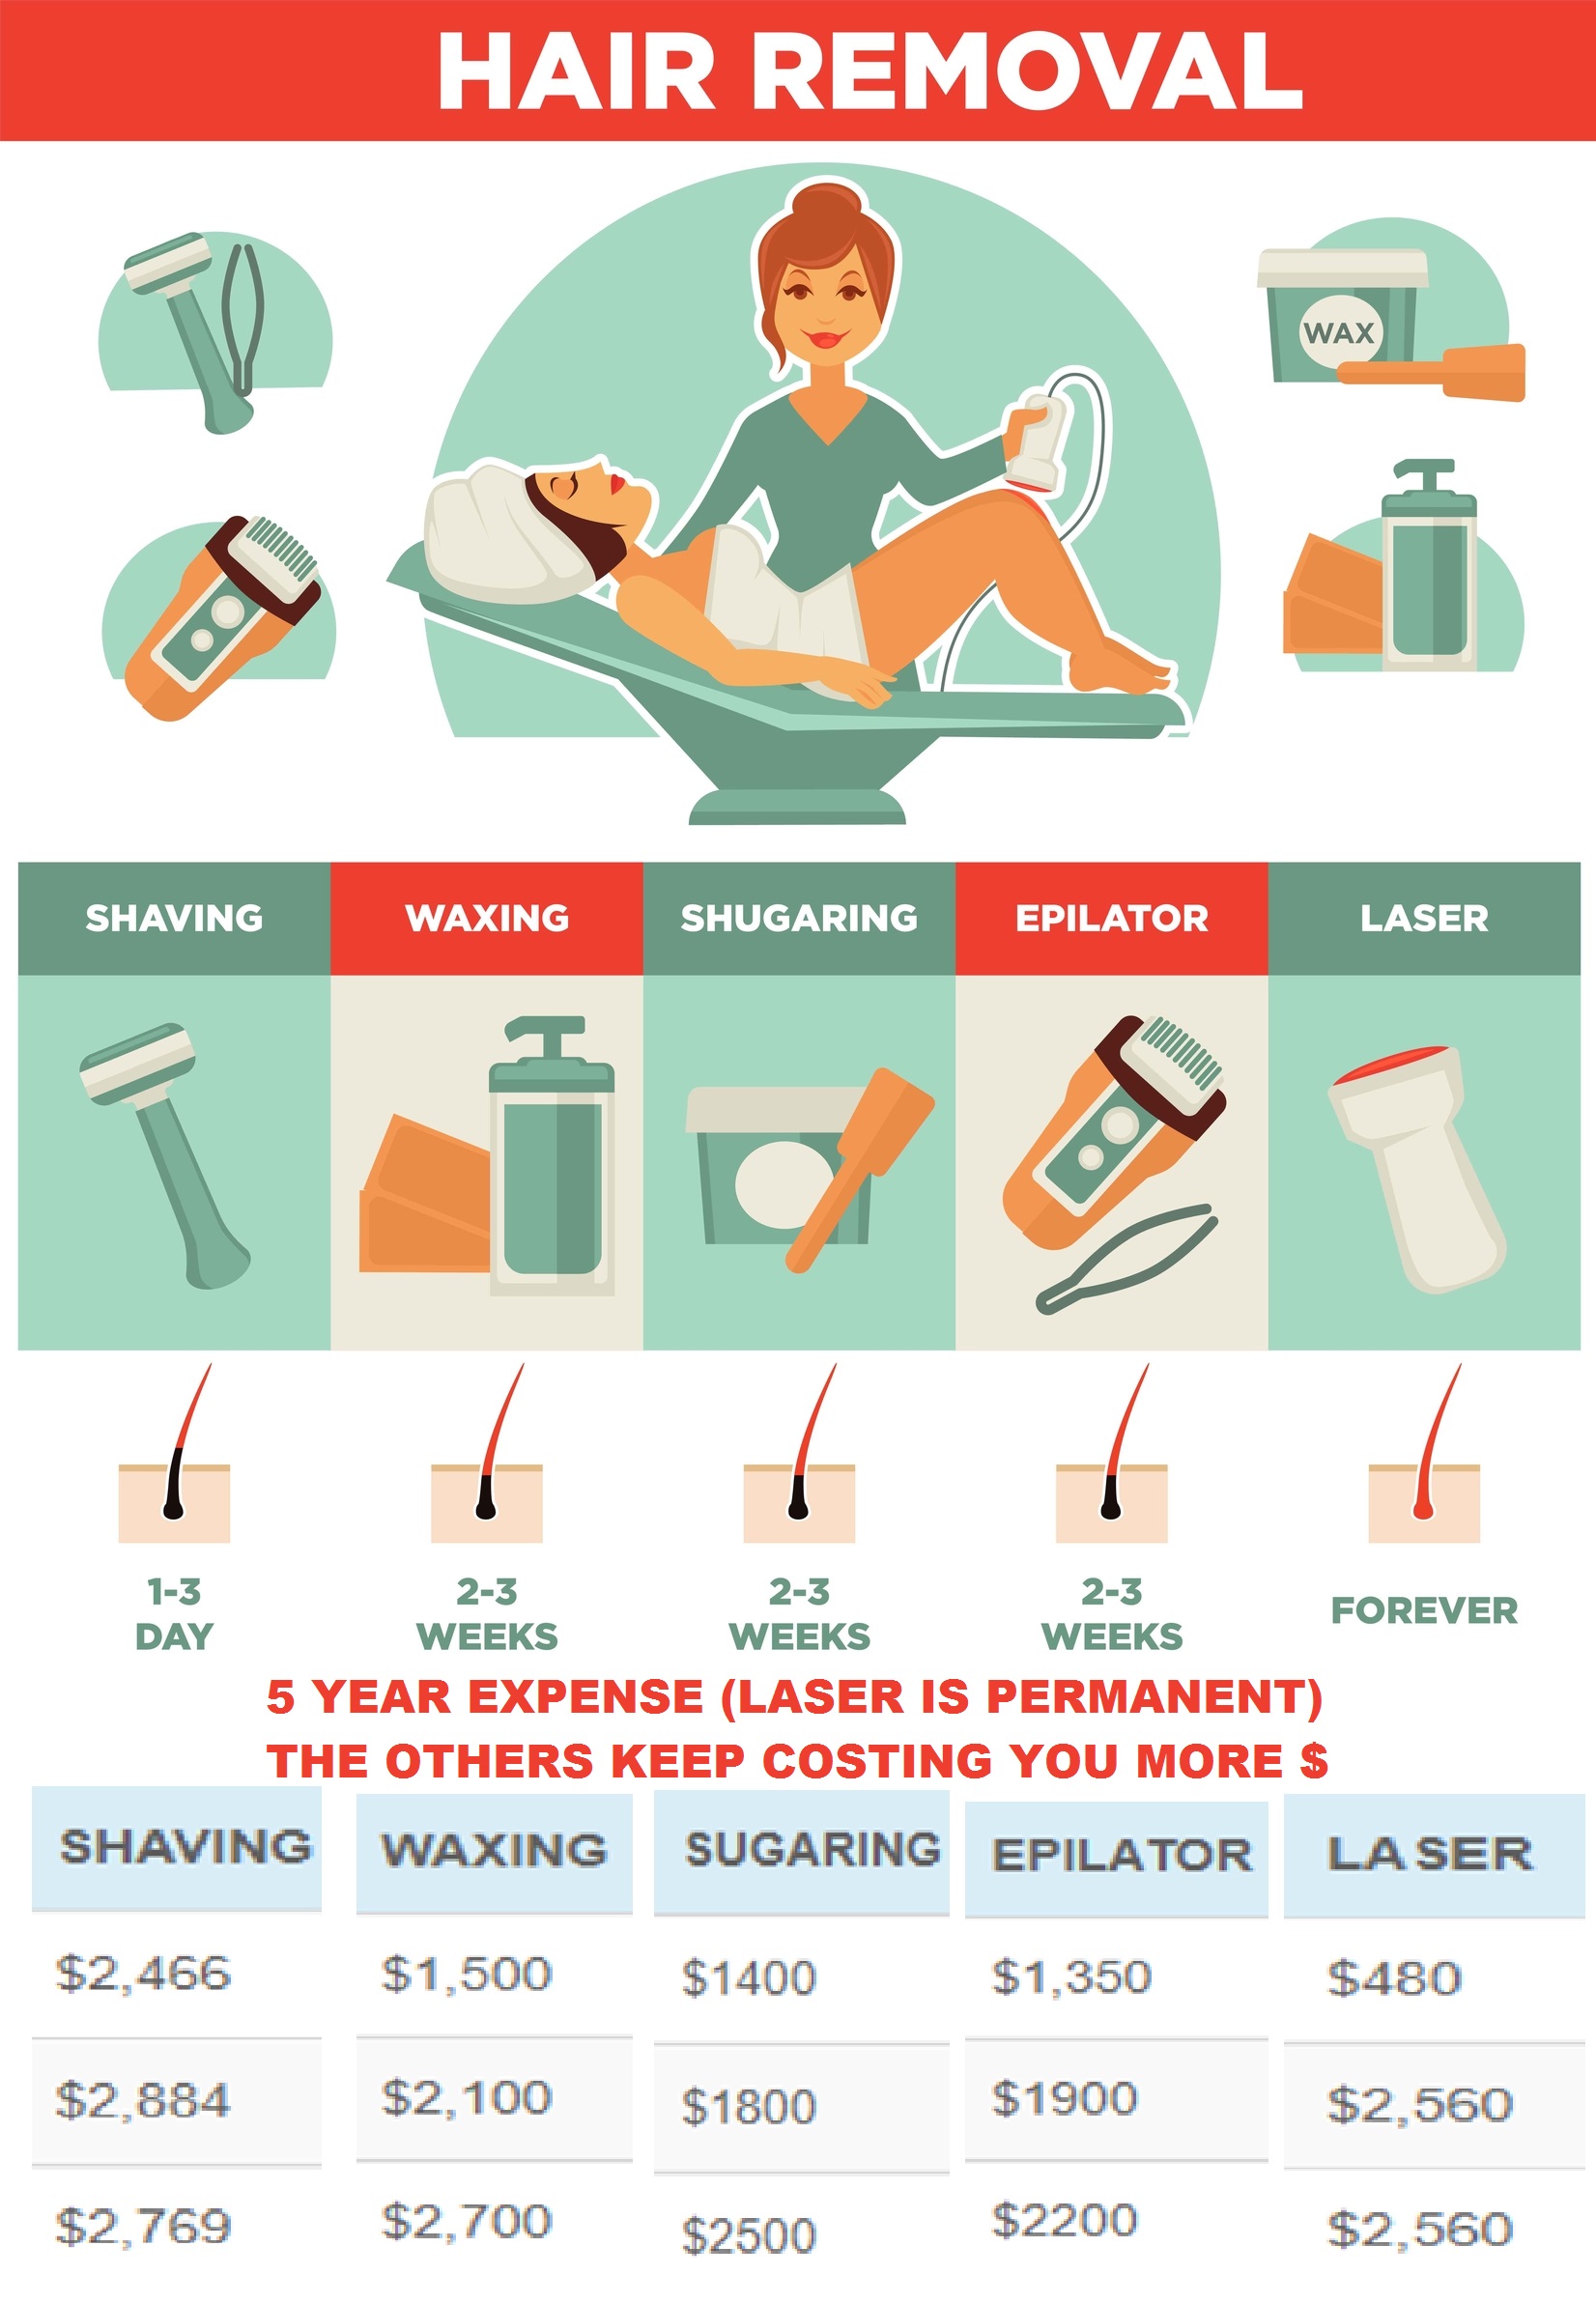 Laser Hair Removal Cost Comparison - VIP Health and Laser Clinic  Gainesville, FL